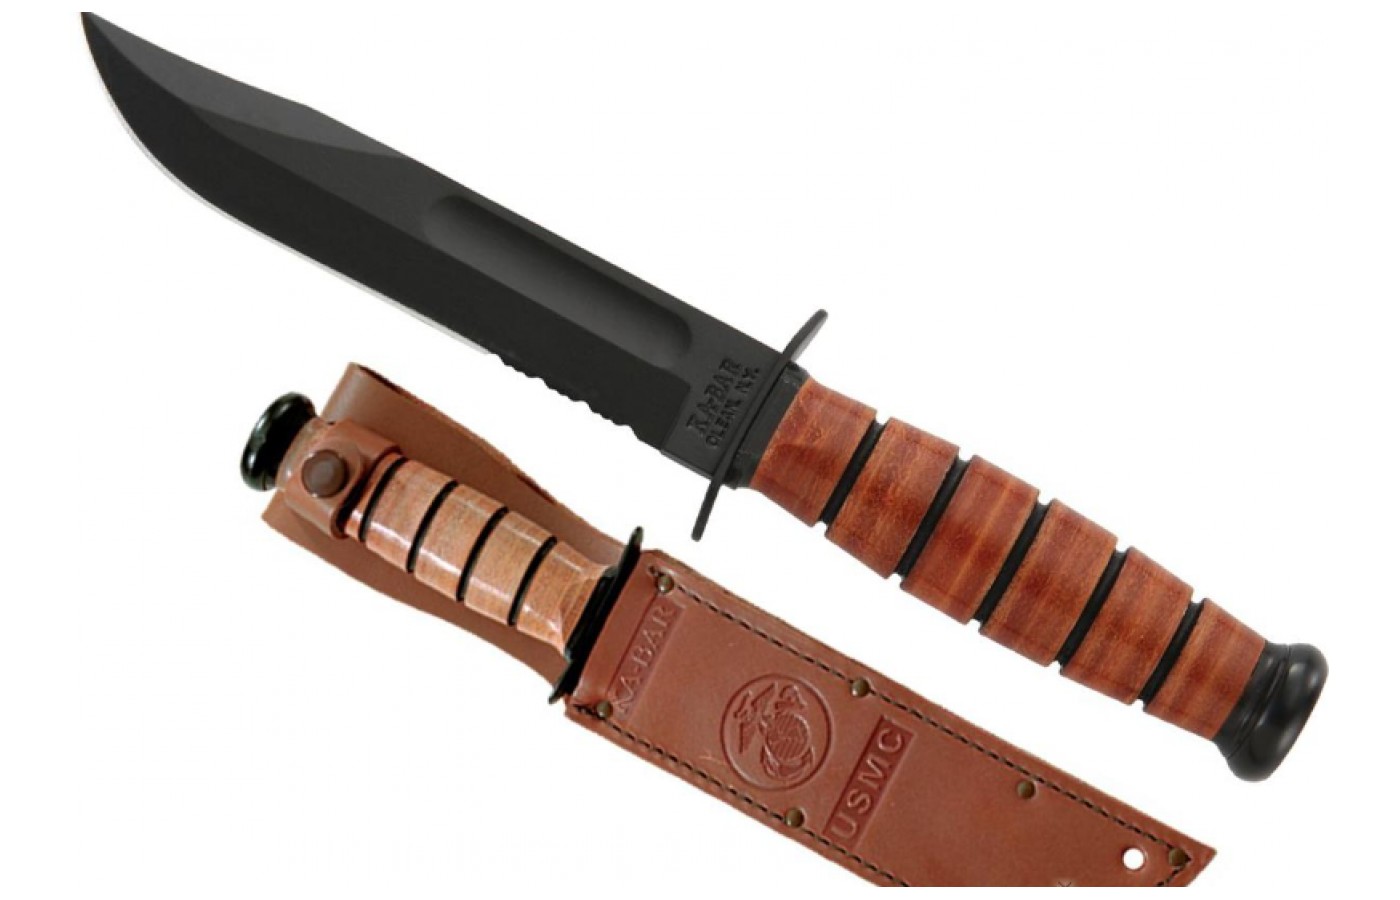 It's always a good idea to pay the extra money for a good sheath to protect your blade.